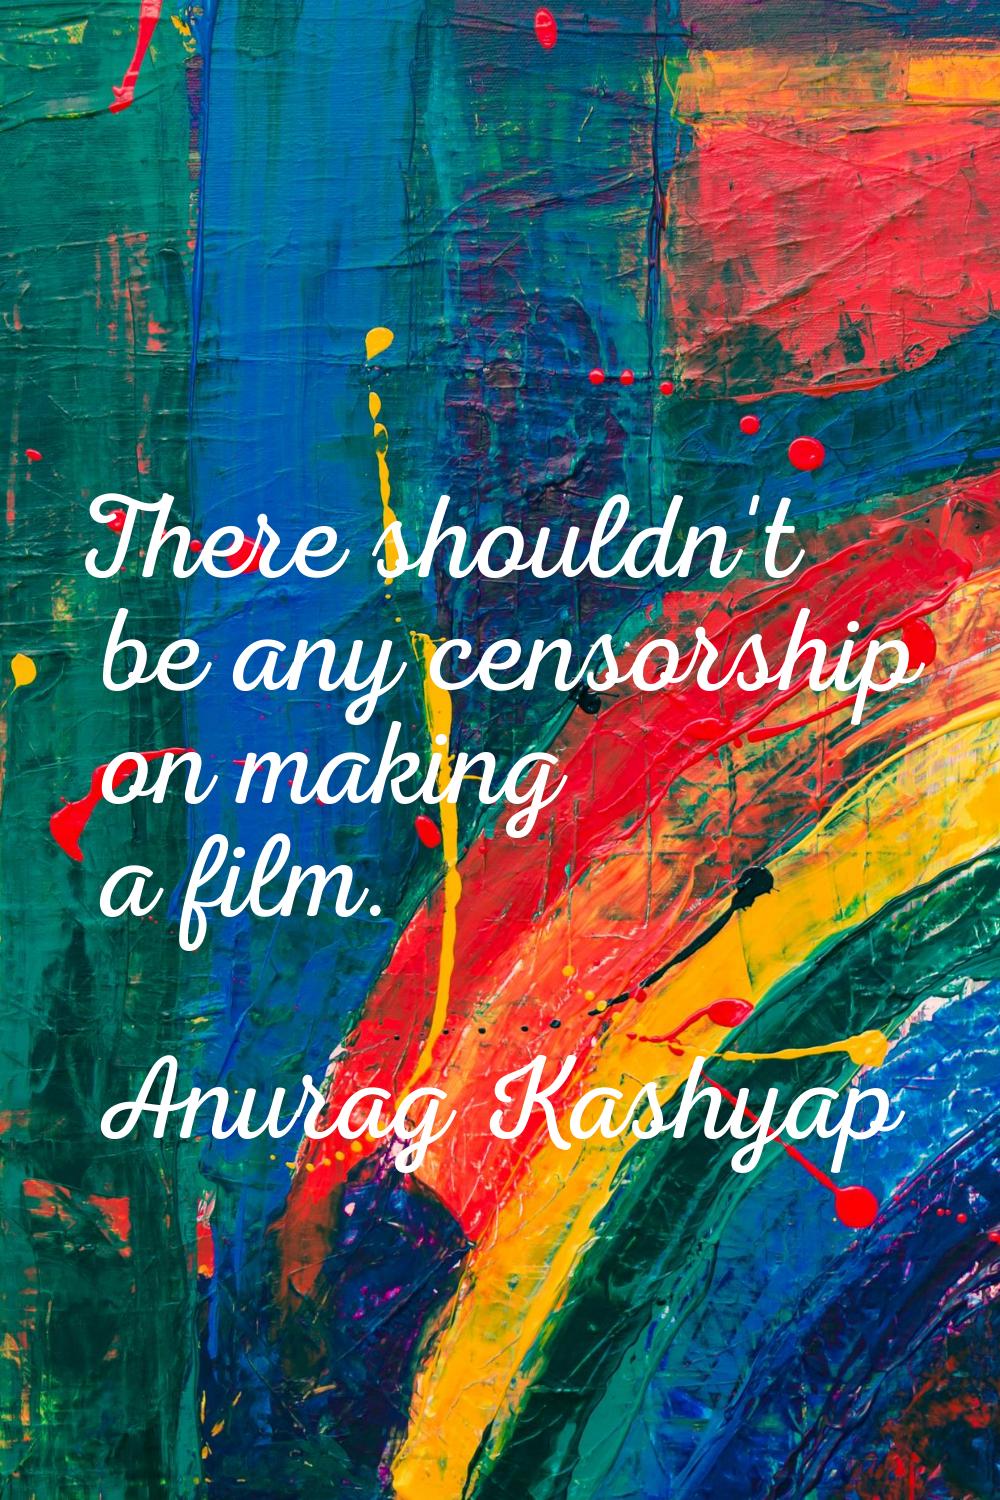 There shouldn't be any censorship on making a film.